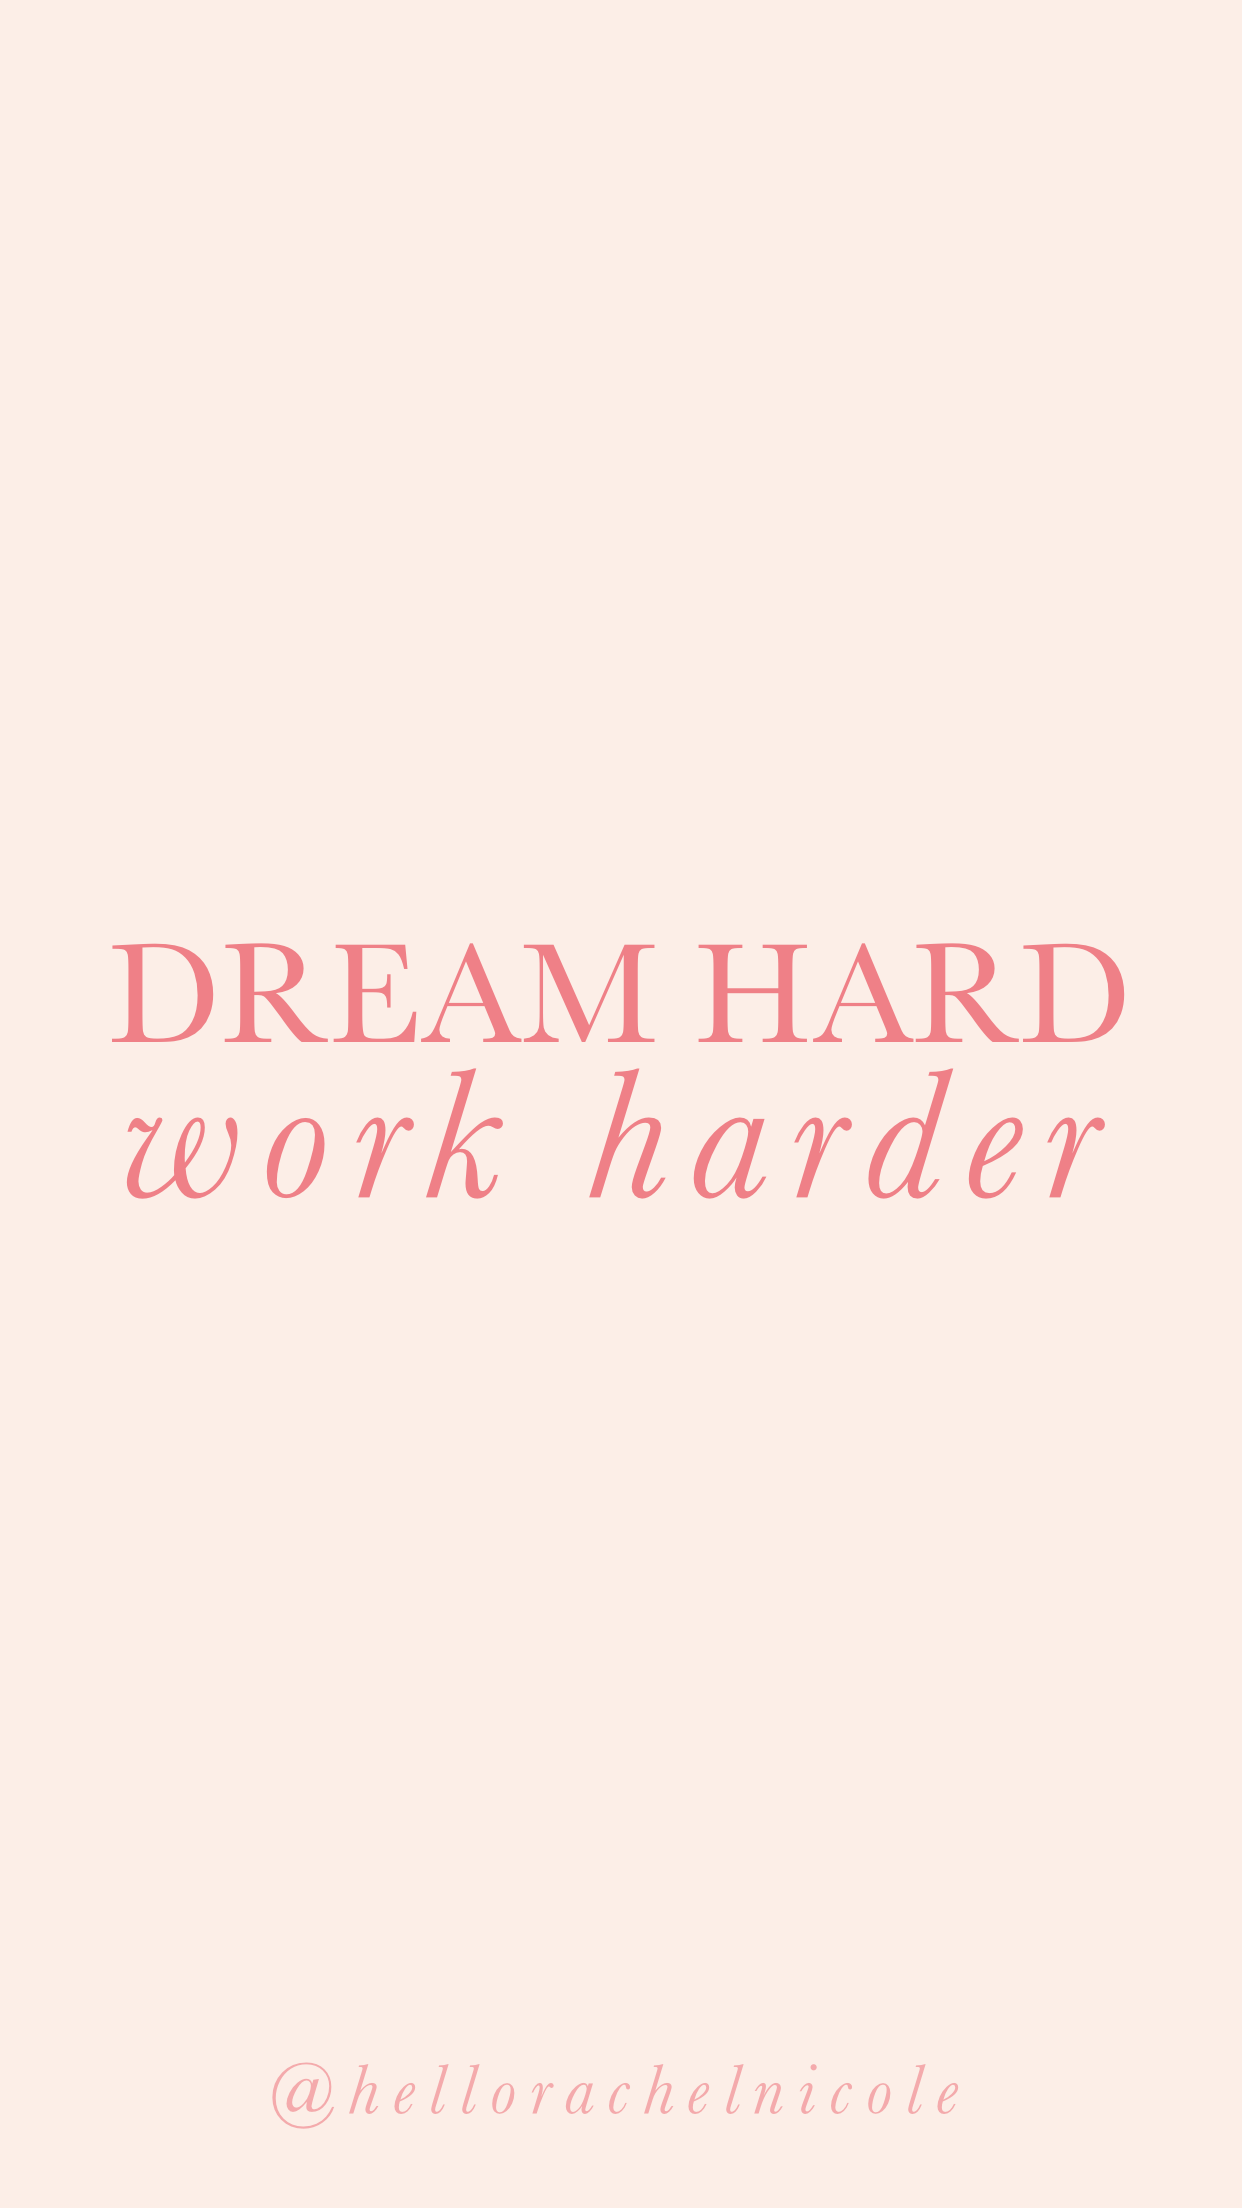 Girlboss quotes, quotes, boss babe quotes, quotes to live by, quotes about hard work, hard work quotes, inspirat. Work quotes funny, Hard work quotes, Work quotes